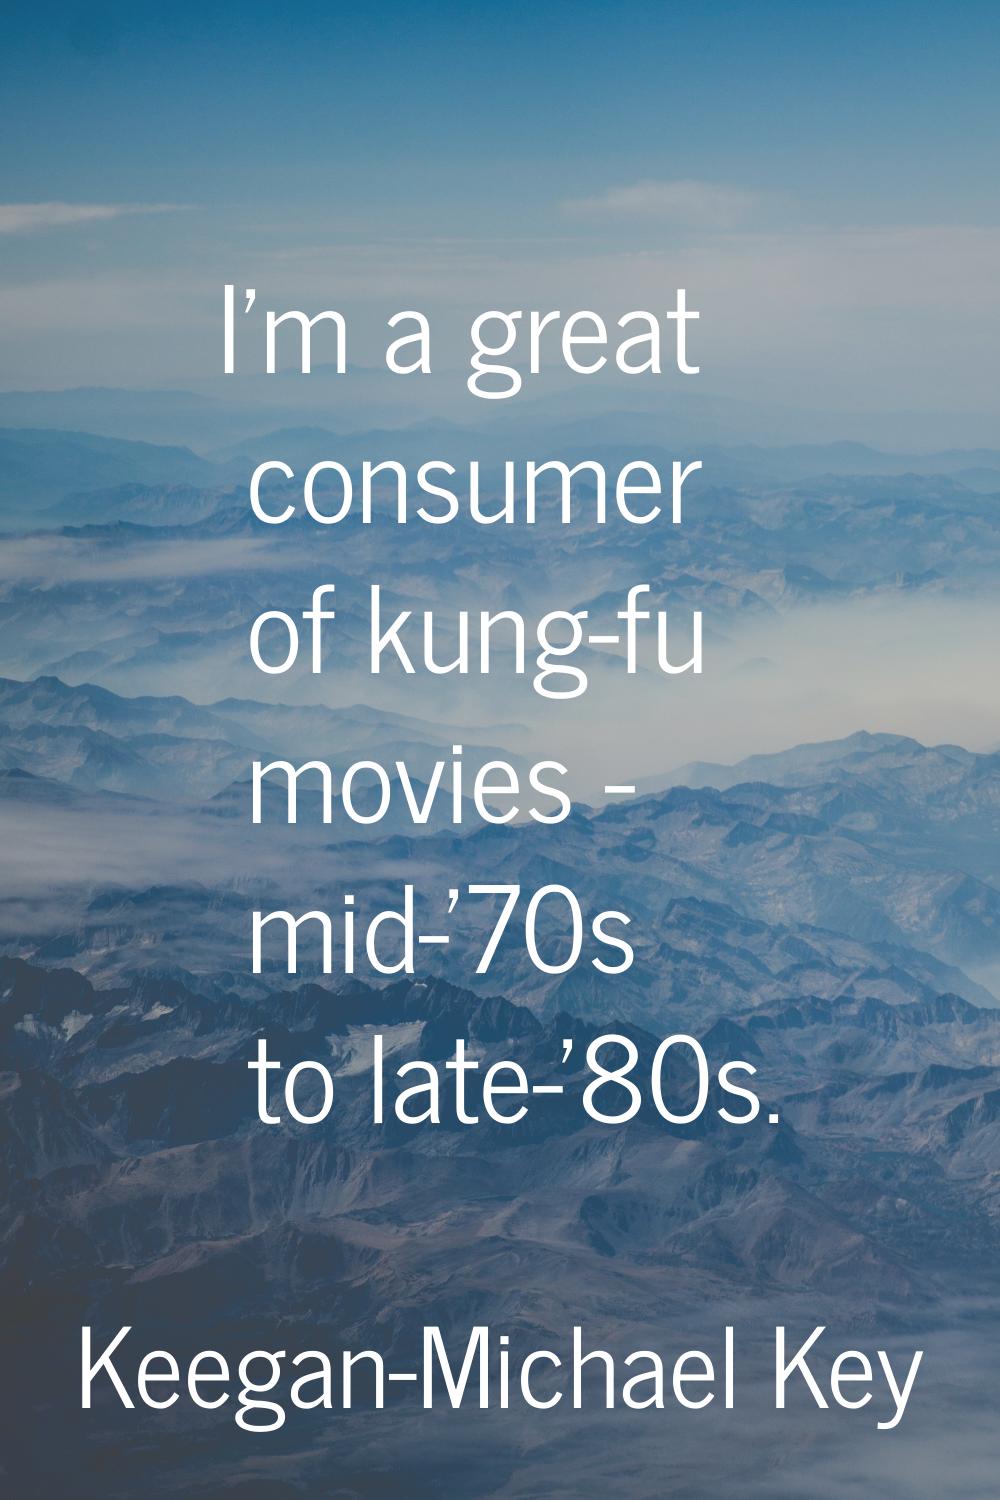 I'm a great consumer of kung-fu movies - mid-'70s to late-'80s.